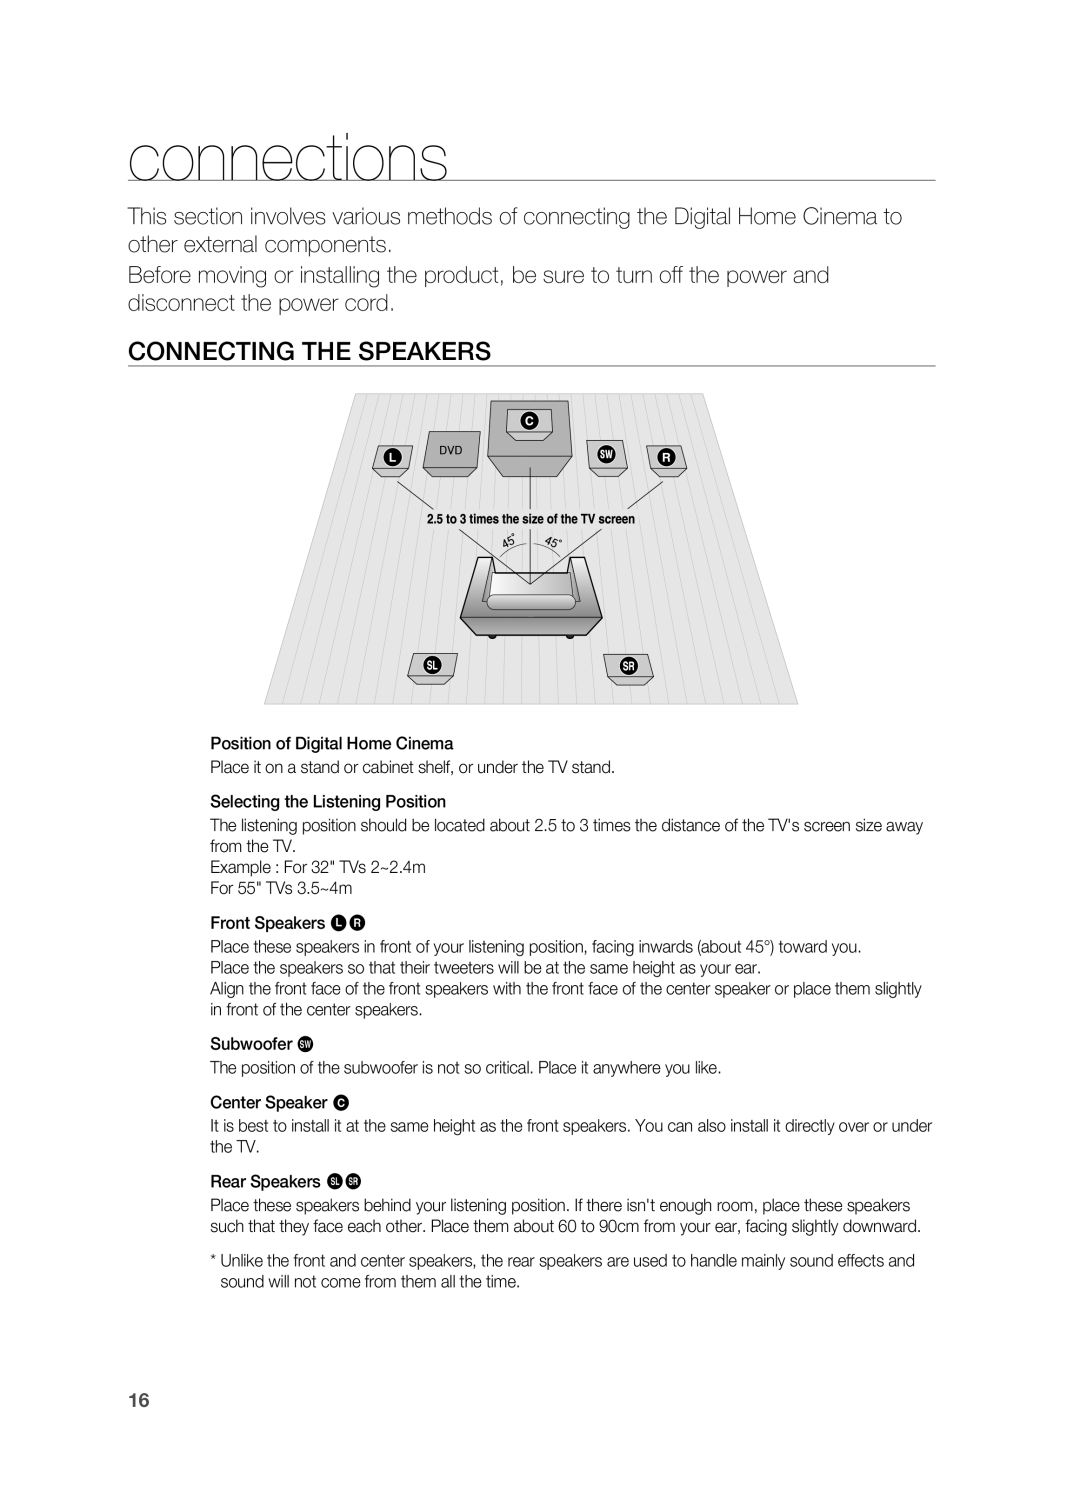 Samsung HT-TX715 user manual connections, Connecting the Speakers 